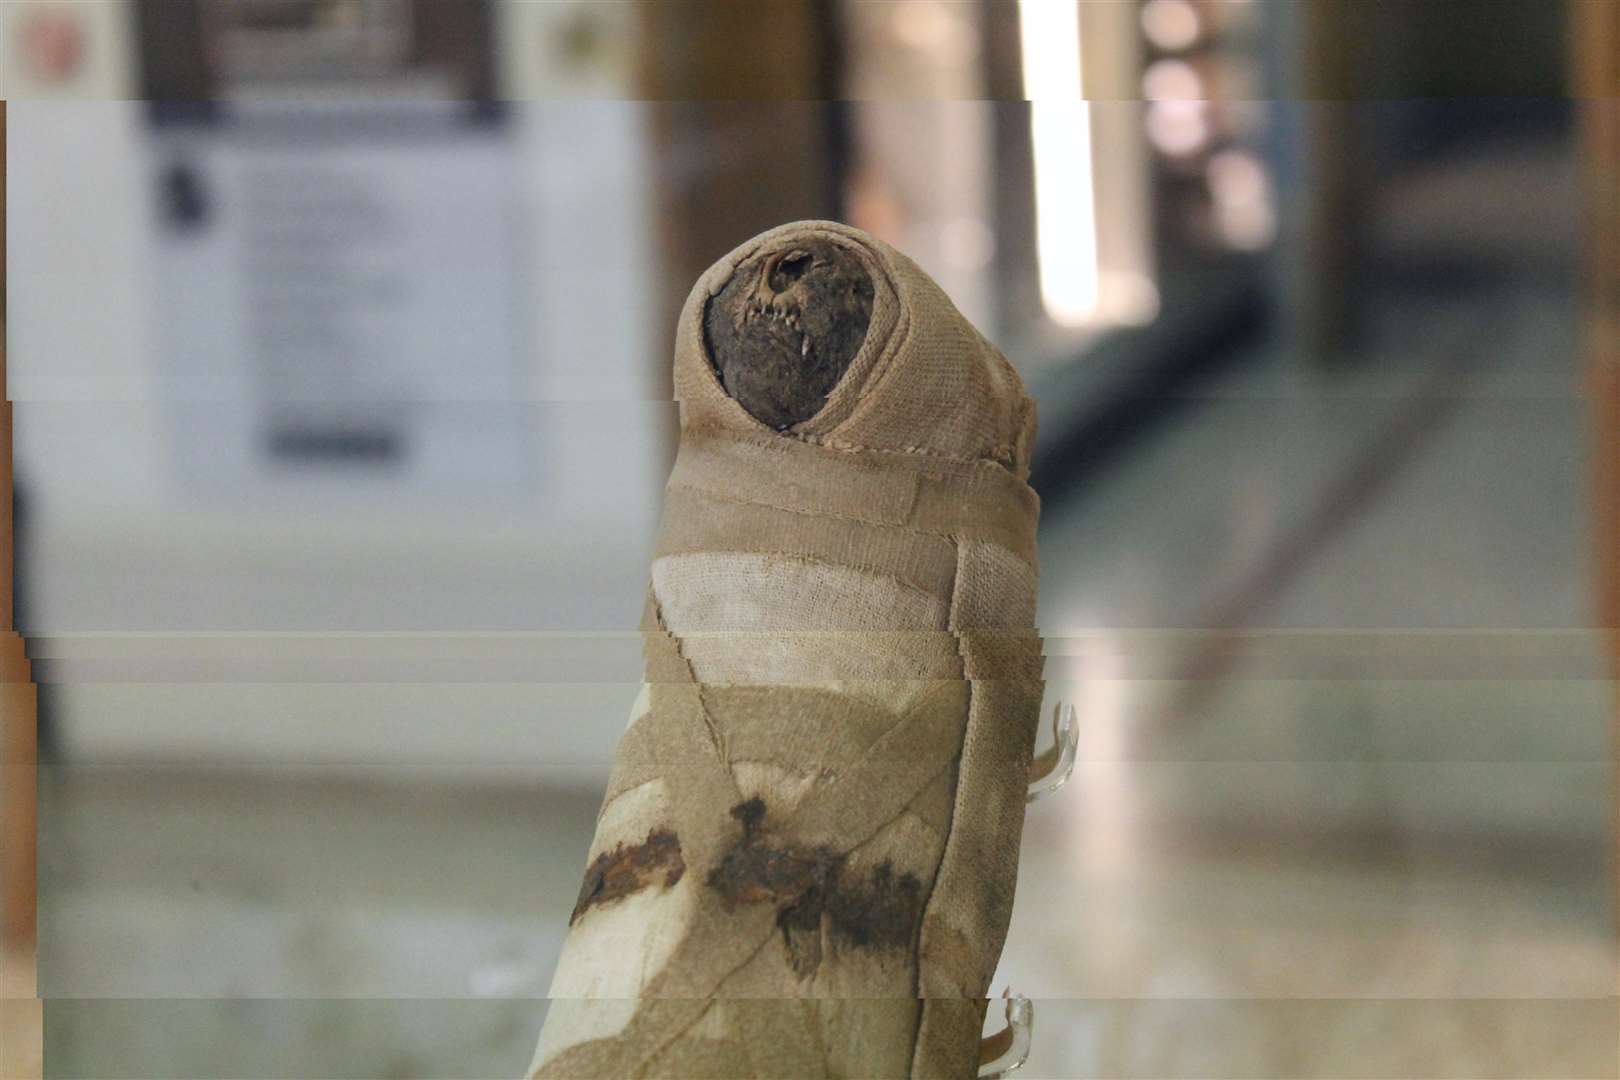 A mummified cat is one of the more unusual items held by the Beaney House of Art and Knowledge